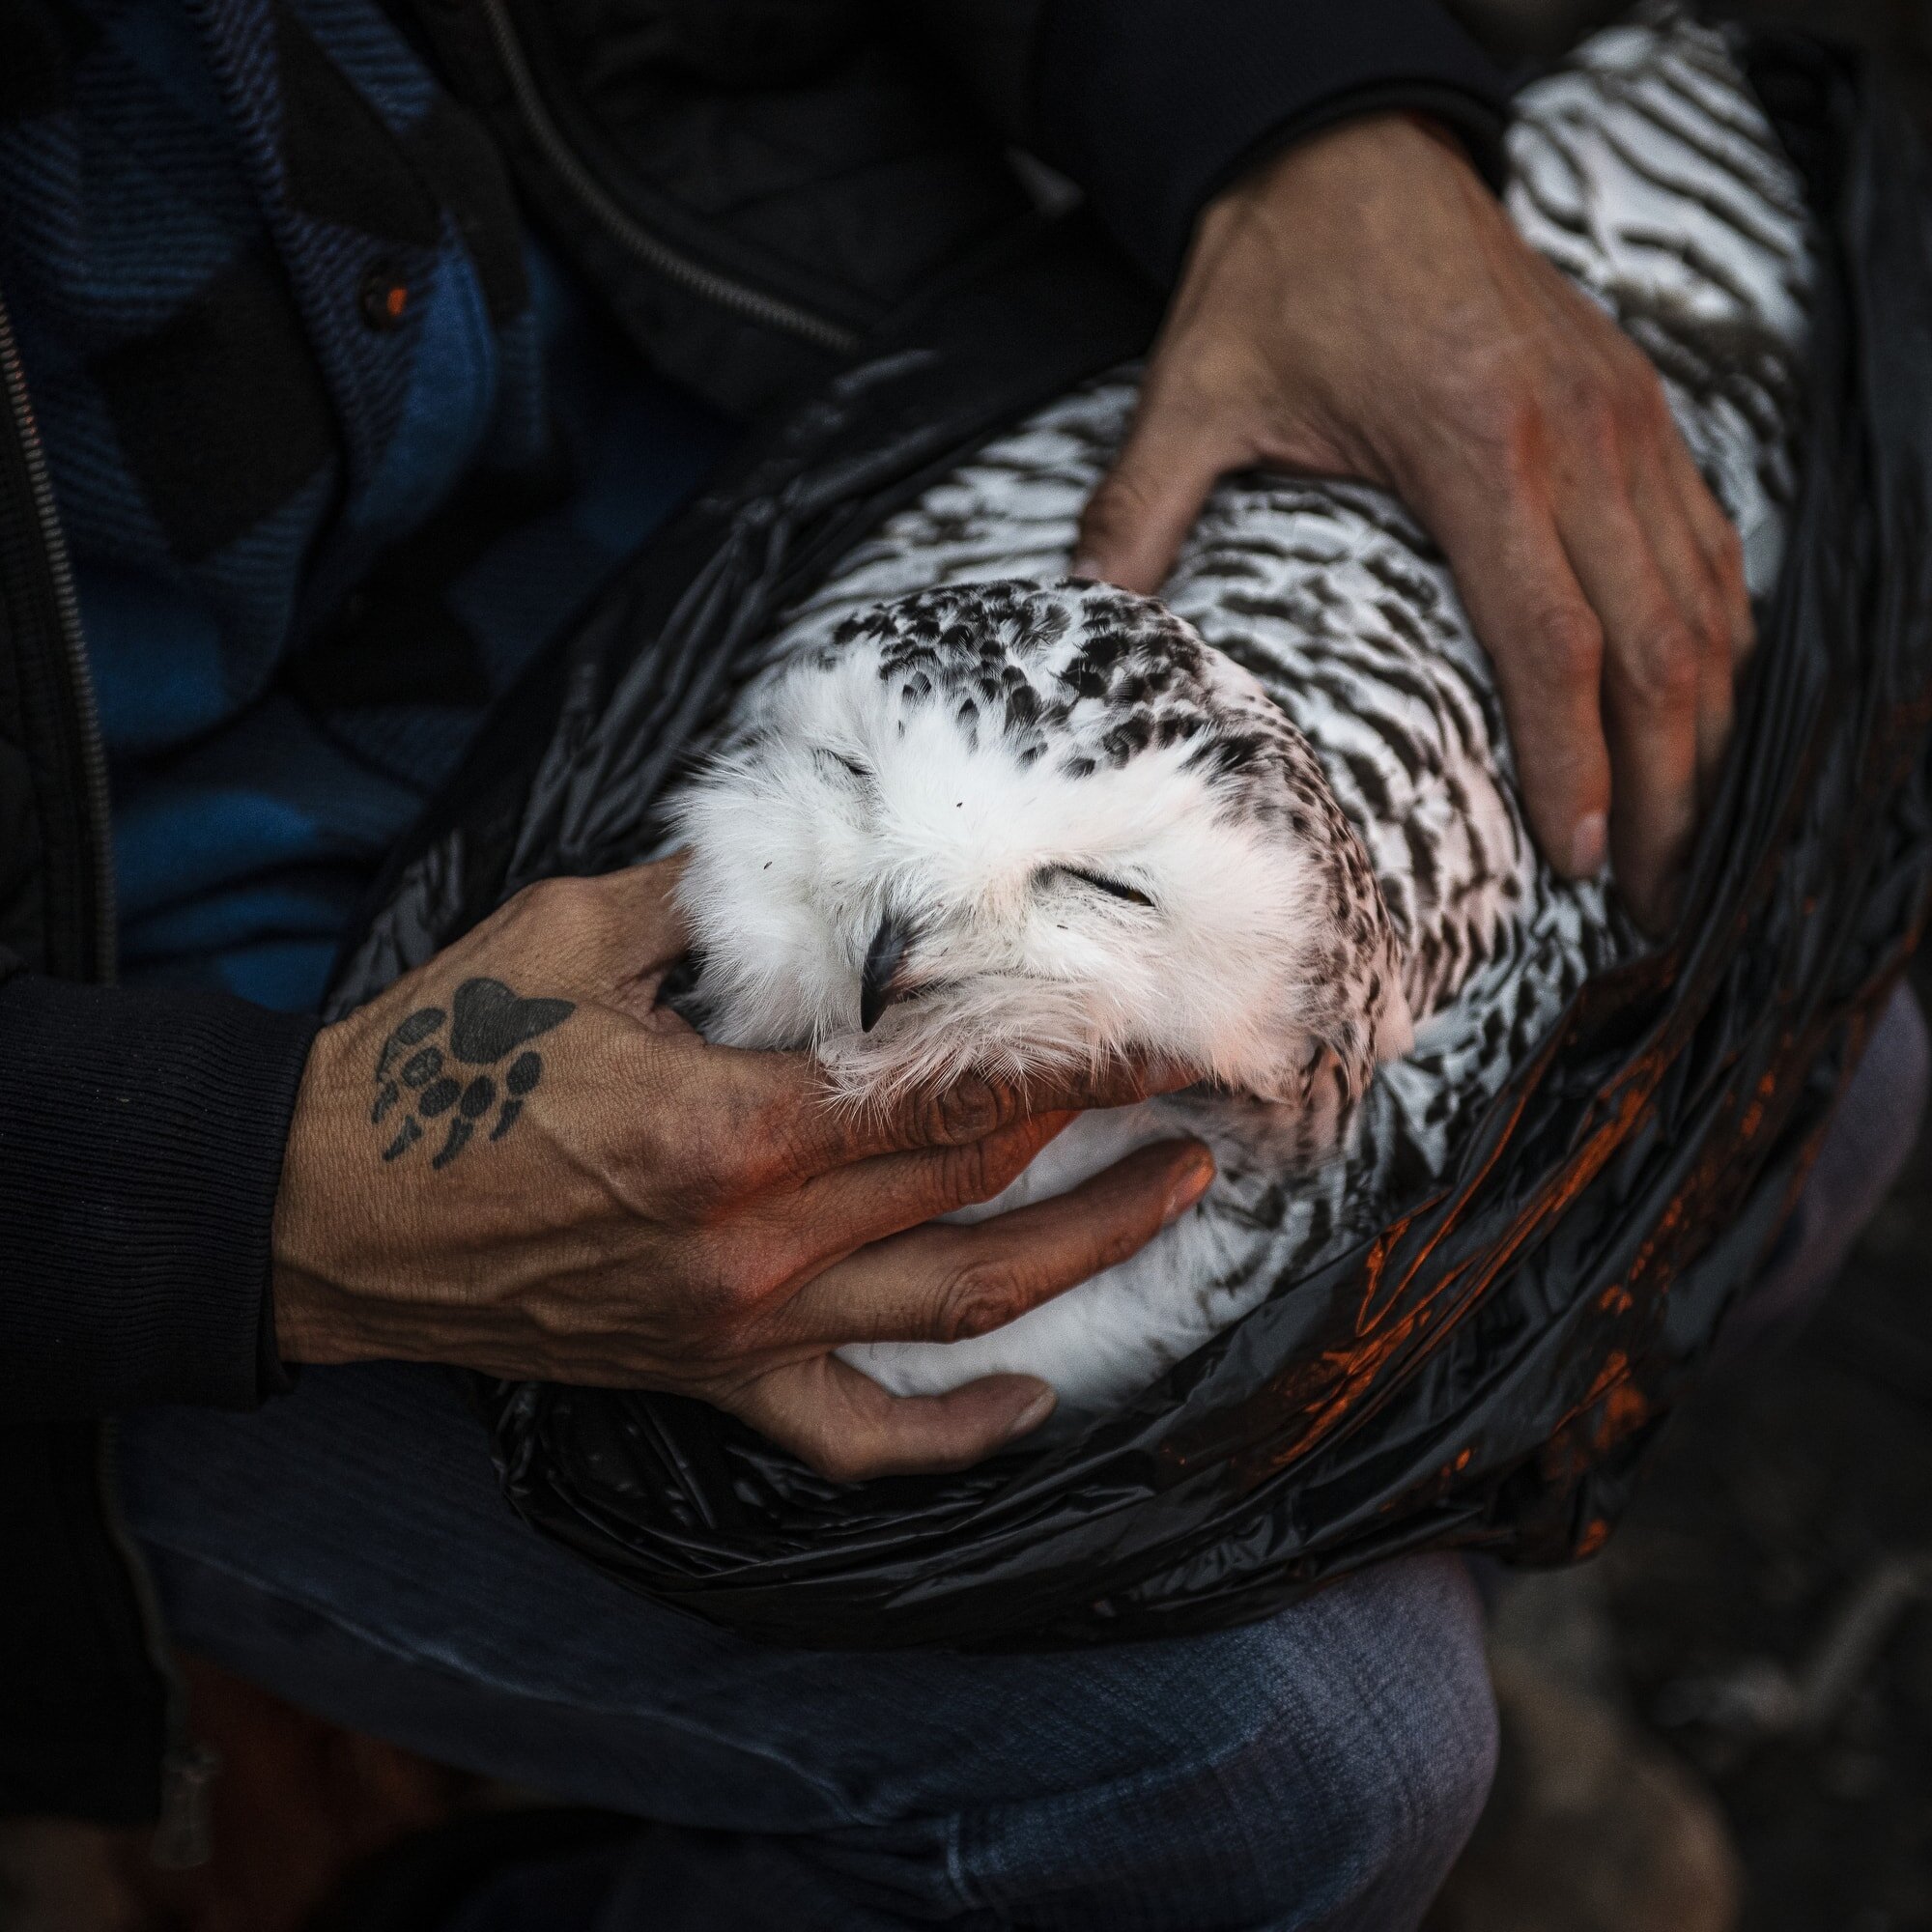 Indigenous spiritual teacher Allen Keeper holds a dead snowy owl that was found near the base of the Long Spruce dam. Snowy owls are a sacred animal to the Cree people and Keeper planned to use the creature’s feathers for ceremonial purposes.